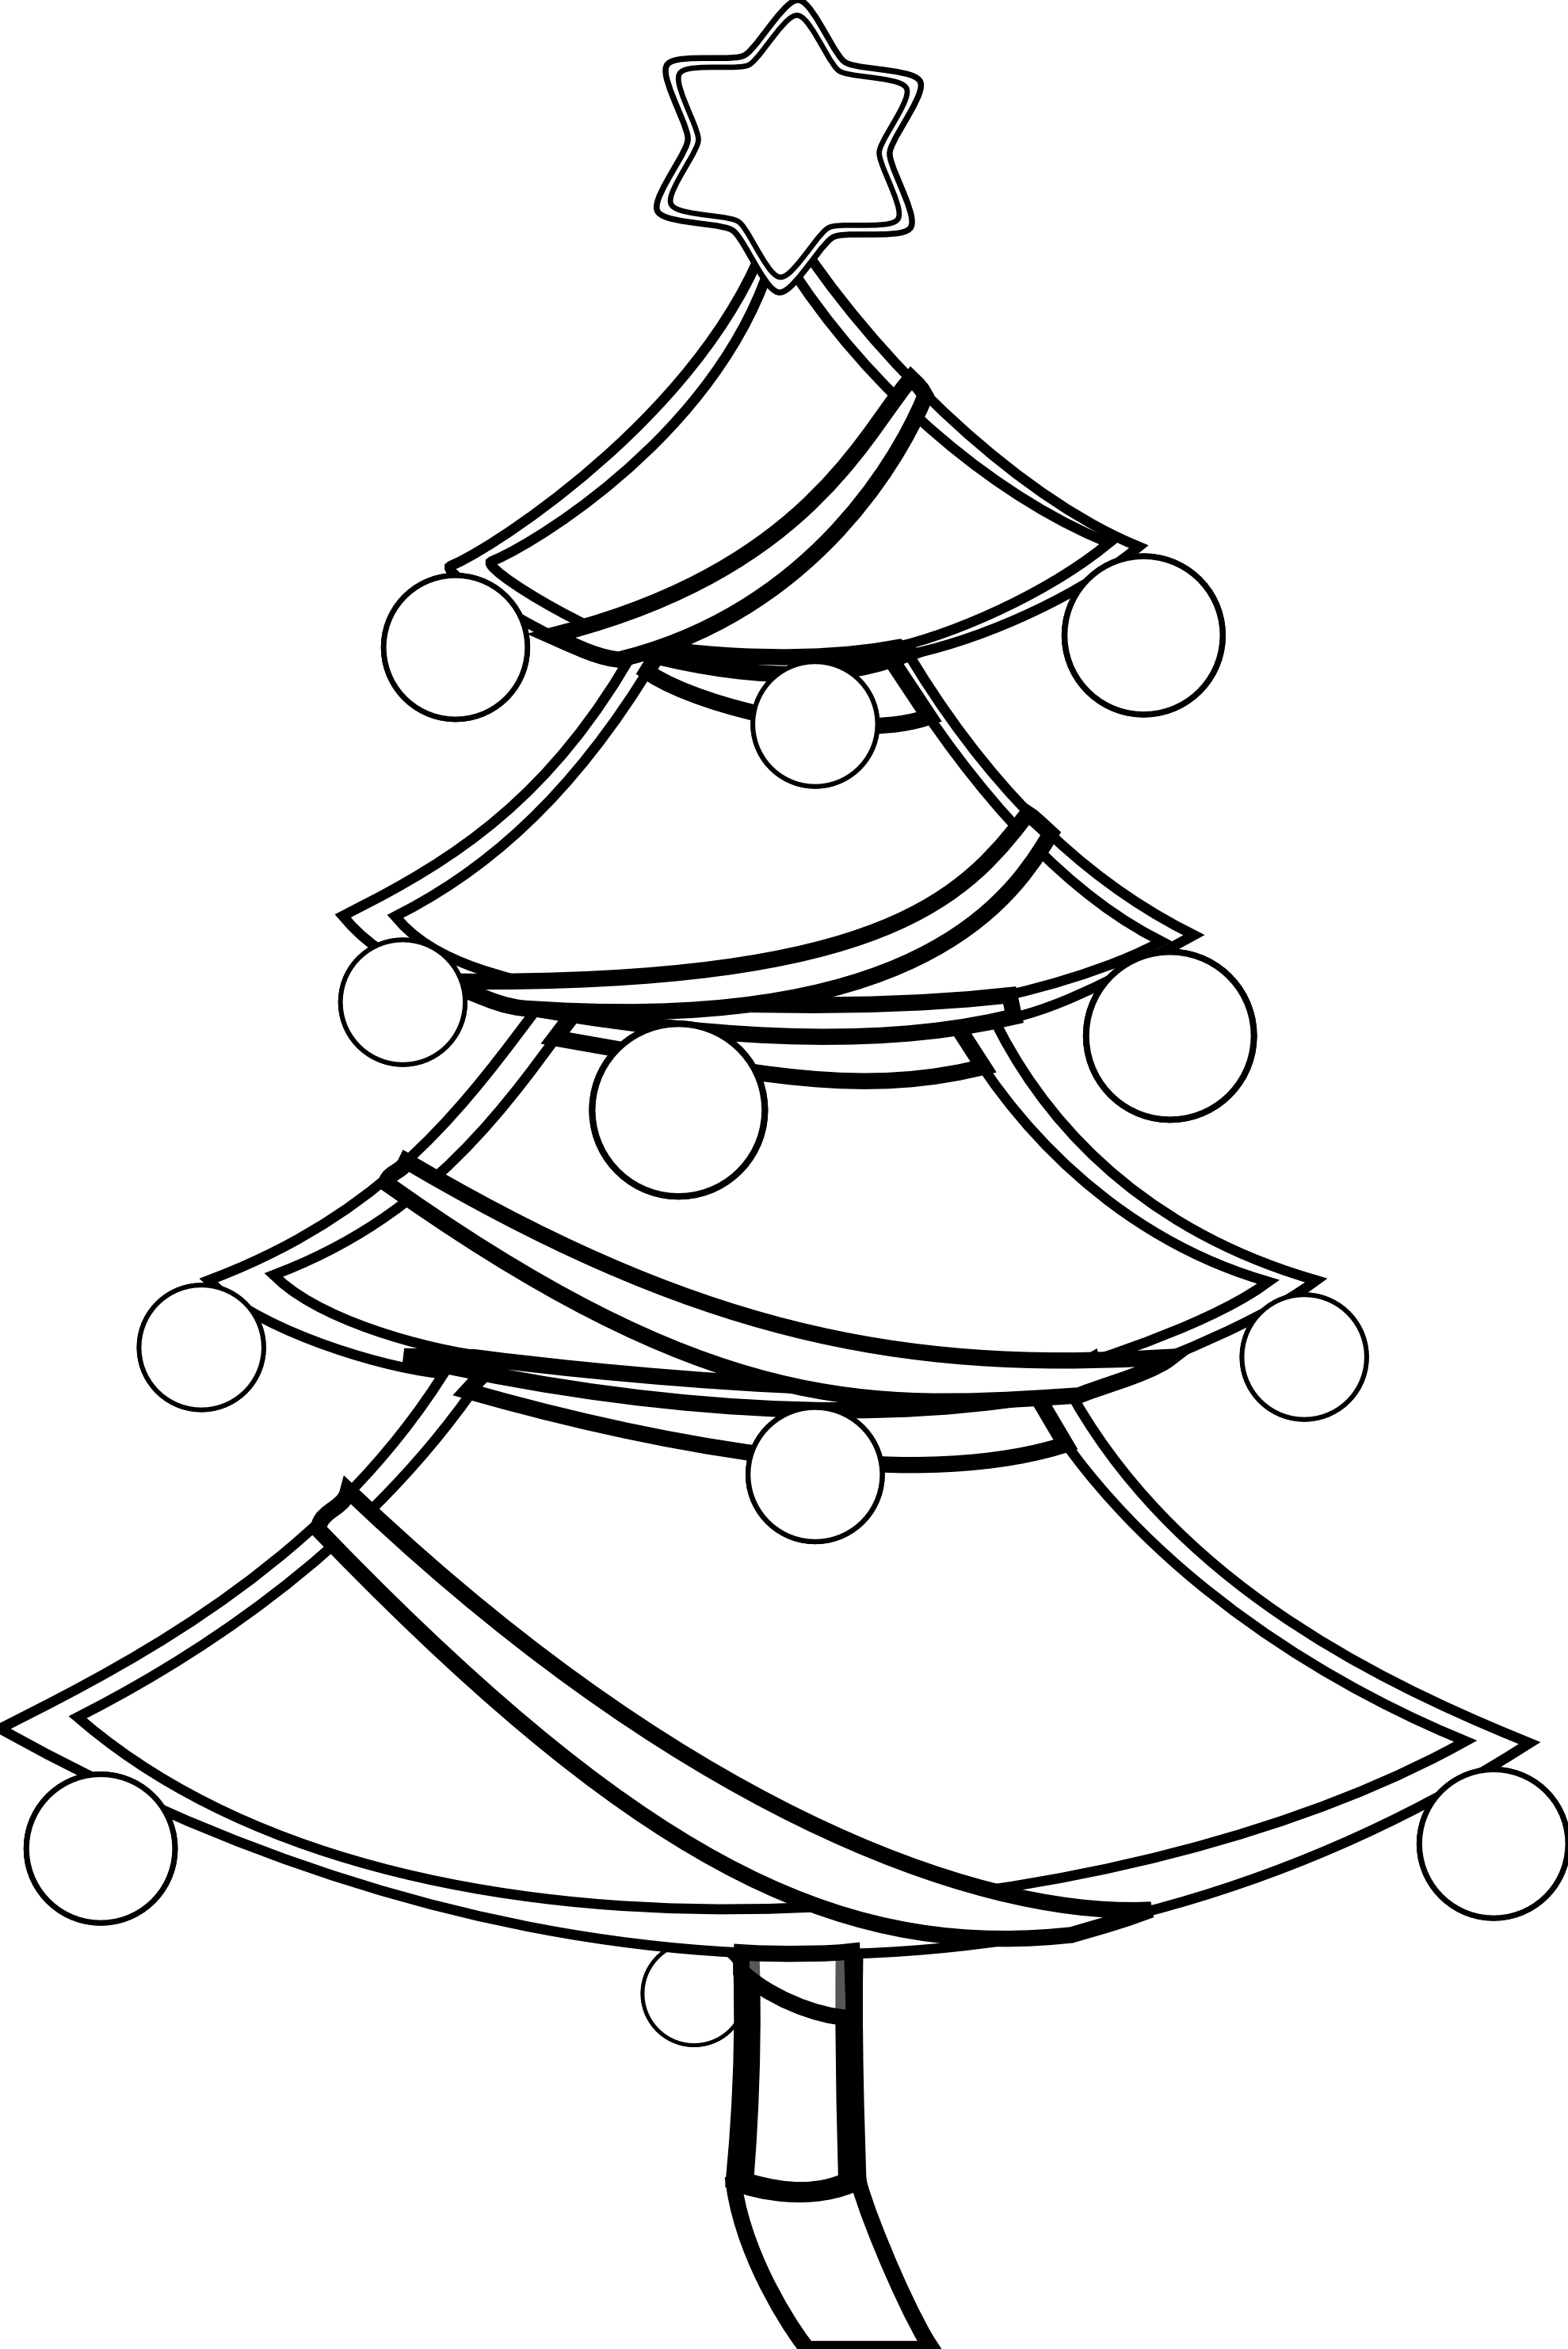 Line Drawing Of A Tree - ClipArt Best